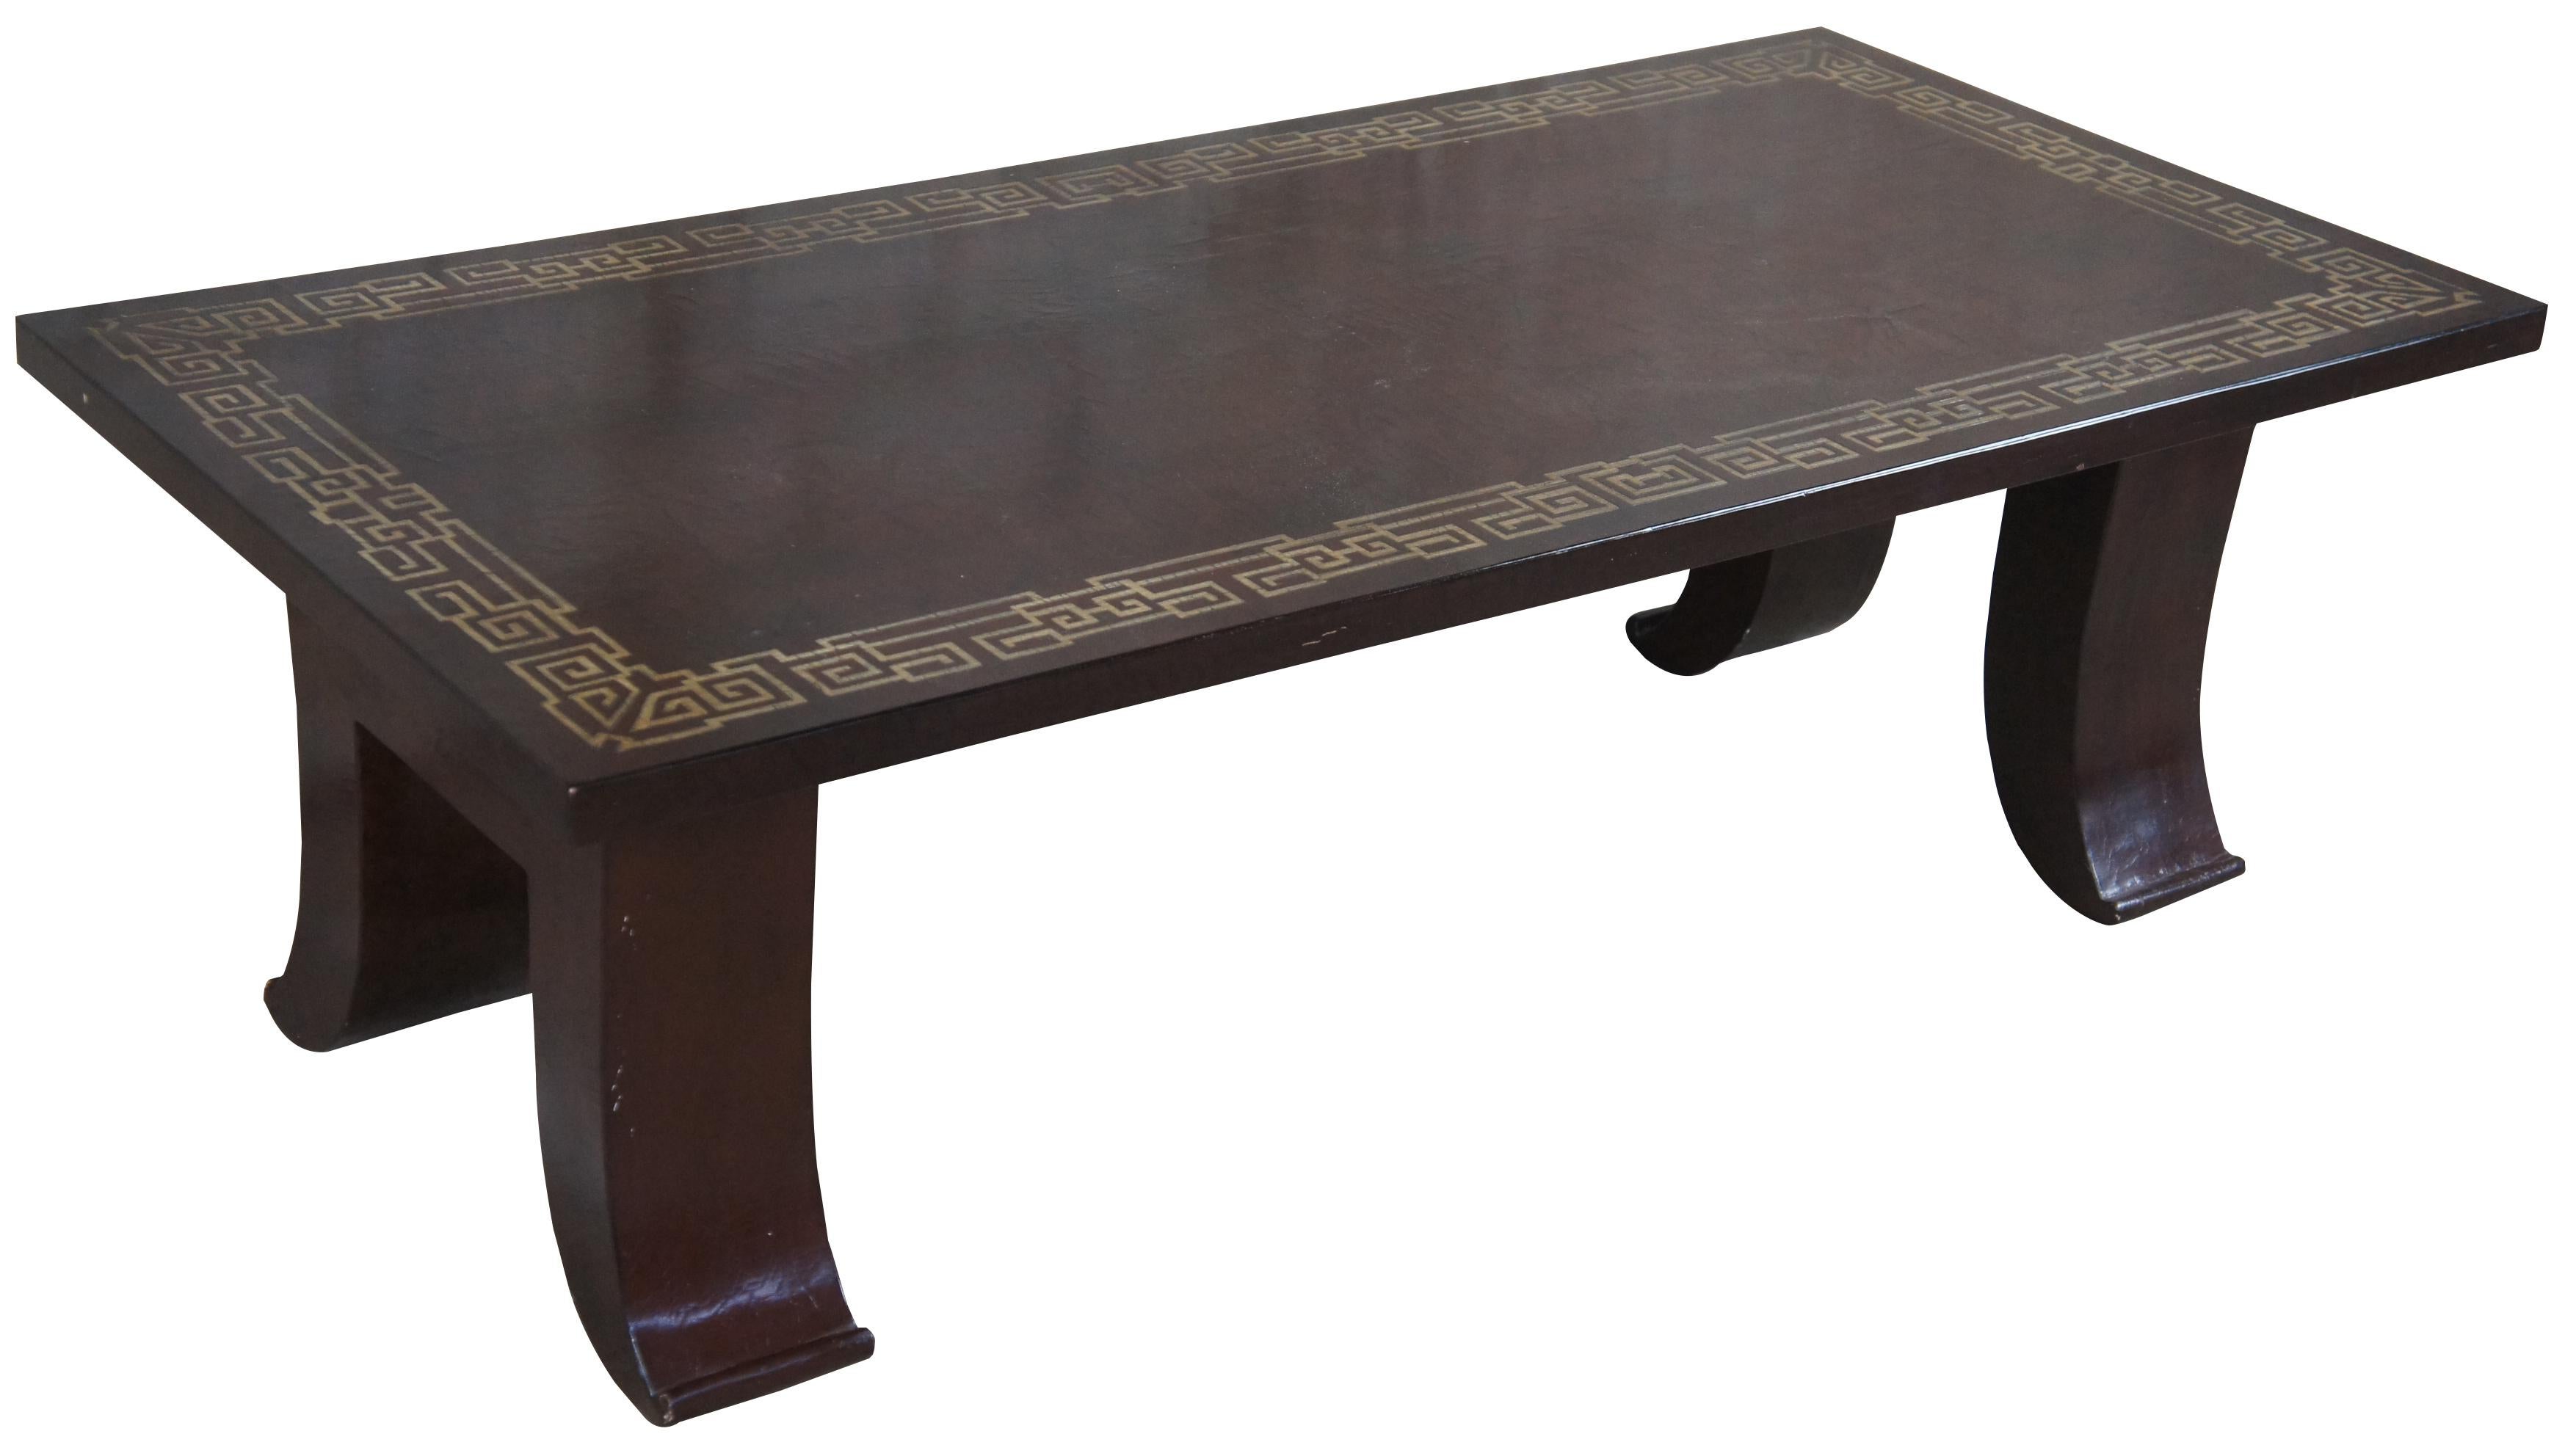 20th century lacquered wood chinoiserie coffee table. Features a rectangular form top with geometric Greek key inlay. The table is supported by flared legs.

Provenance: Estate of Carol Levitan and Jesse Philips
Mr. Philips was both a retailer, as